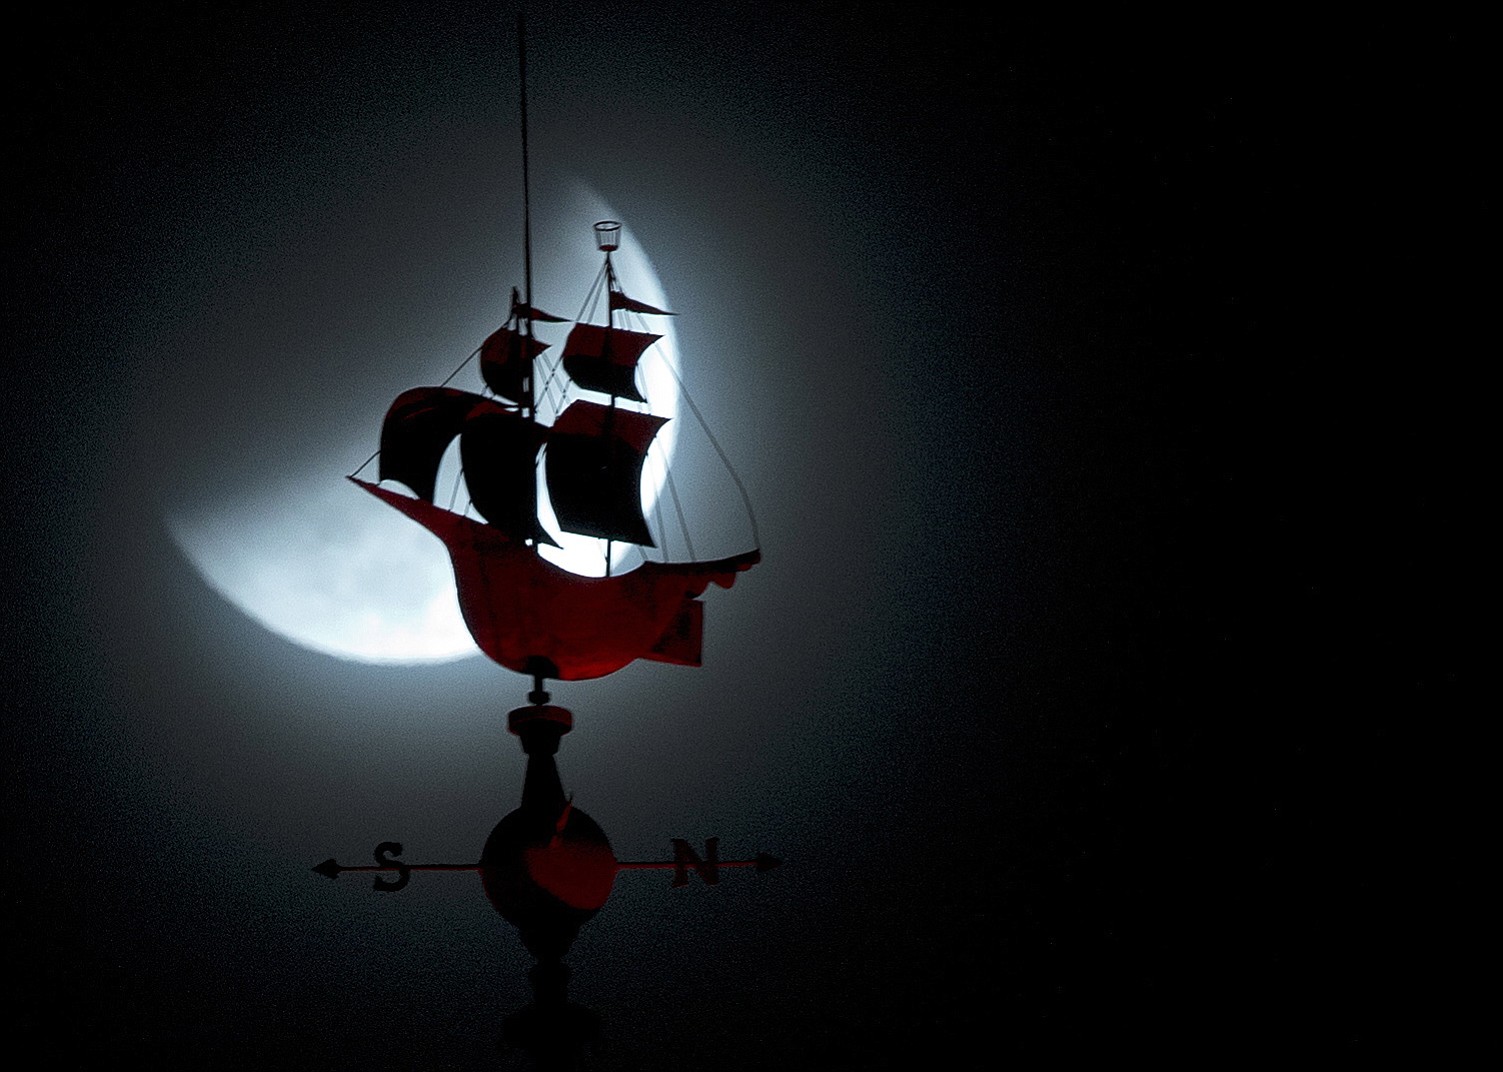 The Earth's shadow begins to fall over the moon during a total lunar eclipse, behind a weathervane shaped like a Spanish galleon on the Freedom Tower in Miami, Wednesday, Oct. 8, 2014.